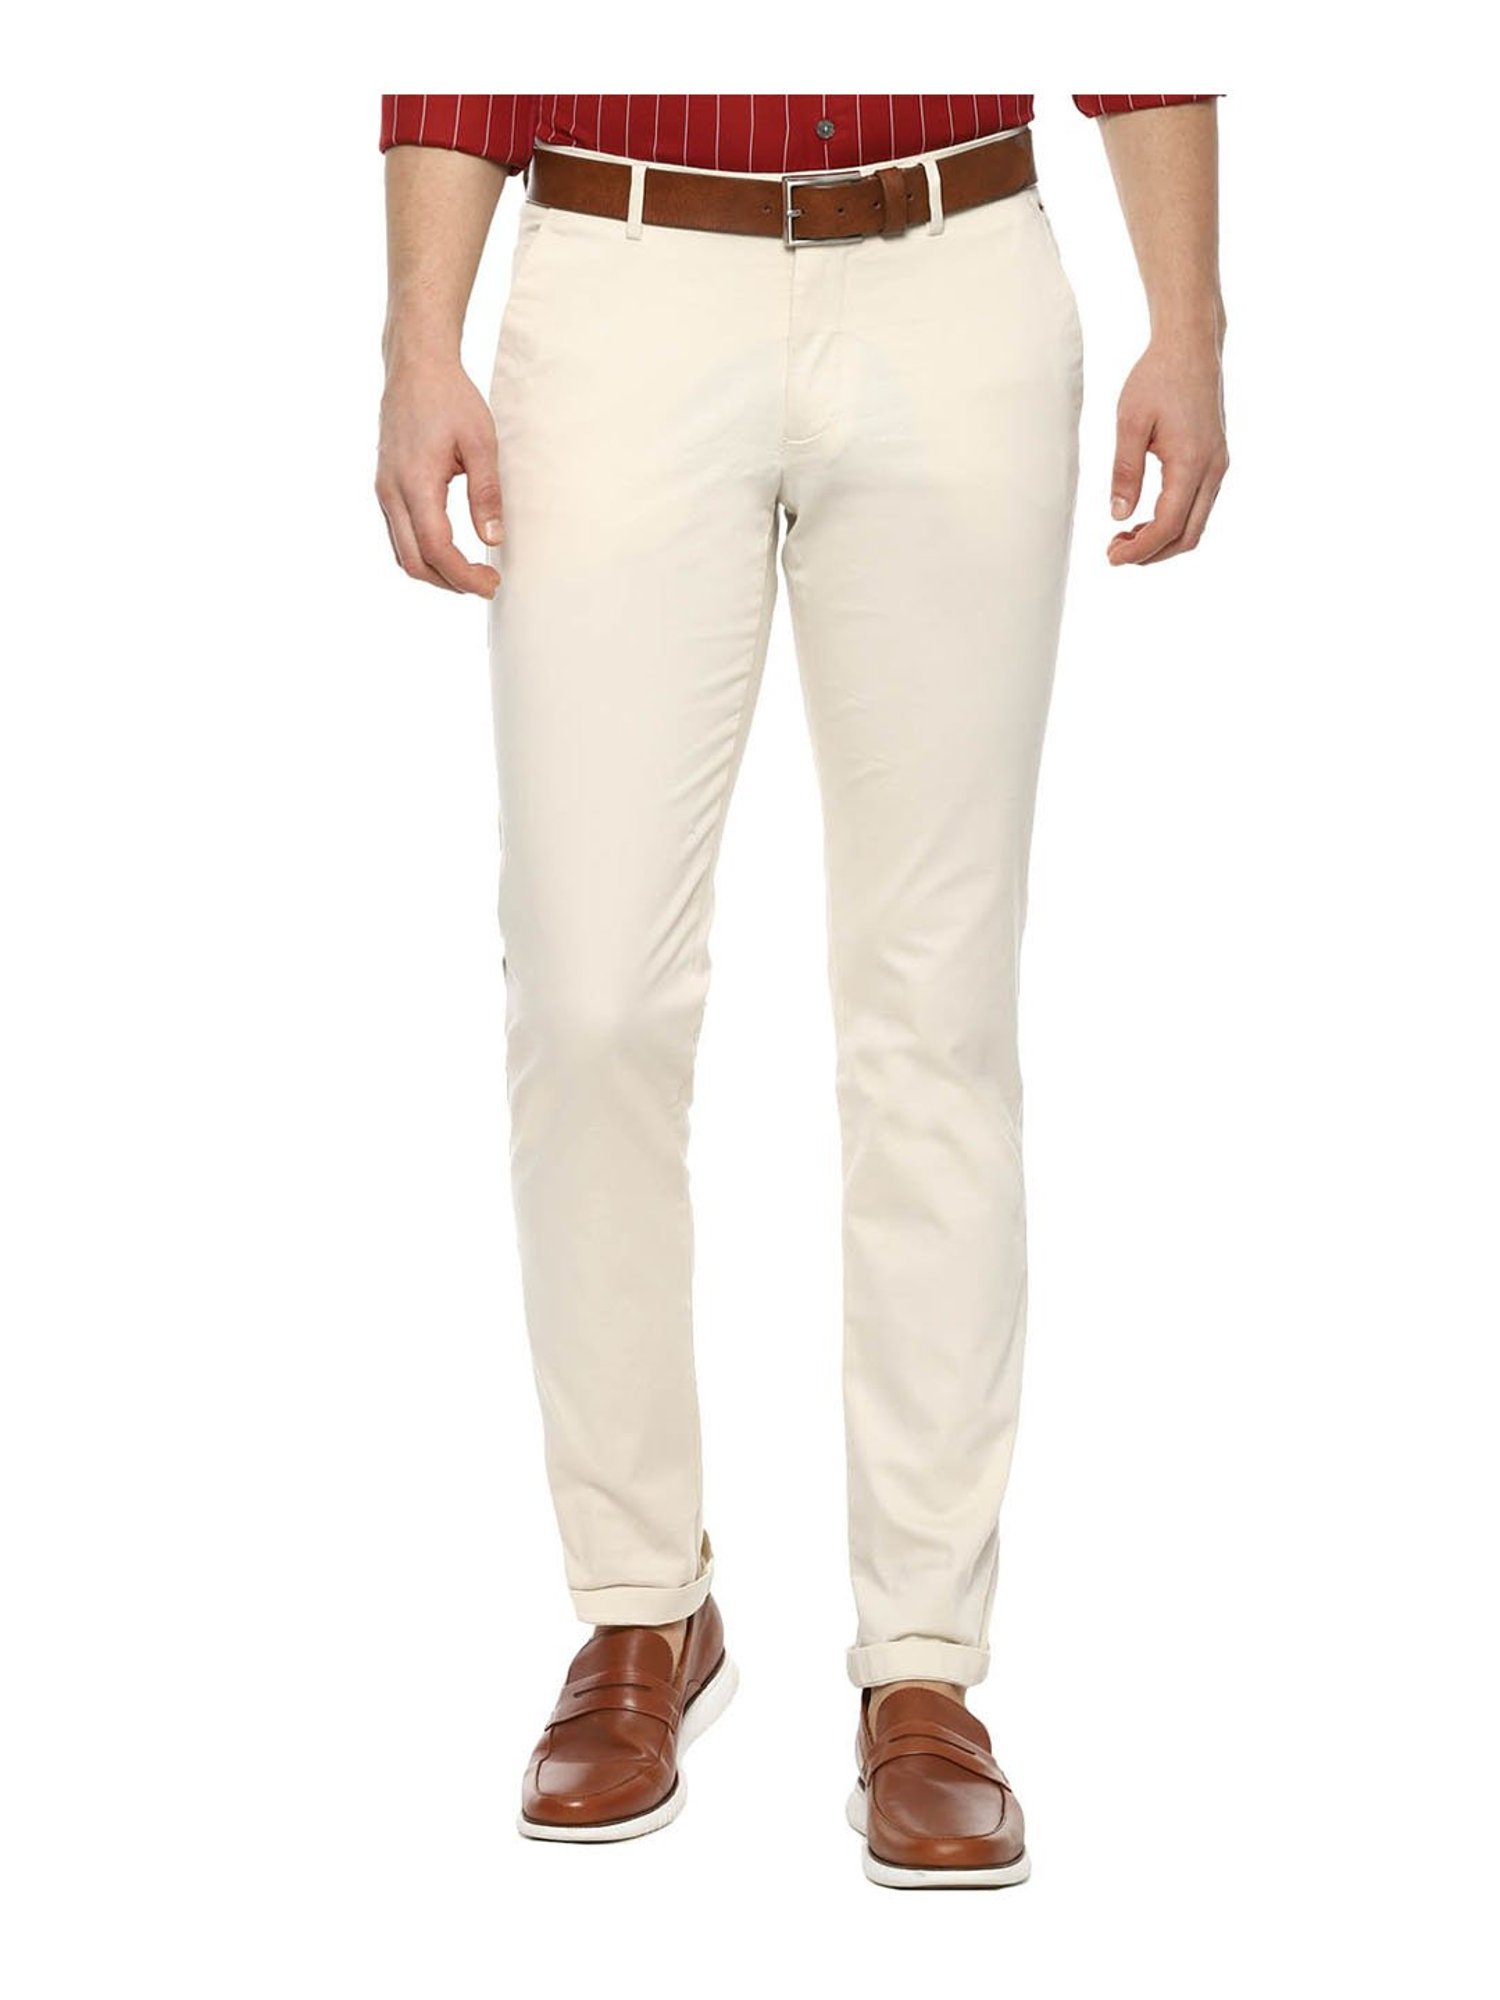 Louis Philippe Jeans Regular Fit Men Beige Trousers - Buy Louis Philippe  Jeans Regular Fit Men Beige Trousers Online at Best Prices in India